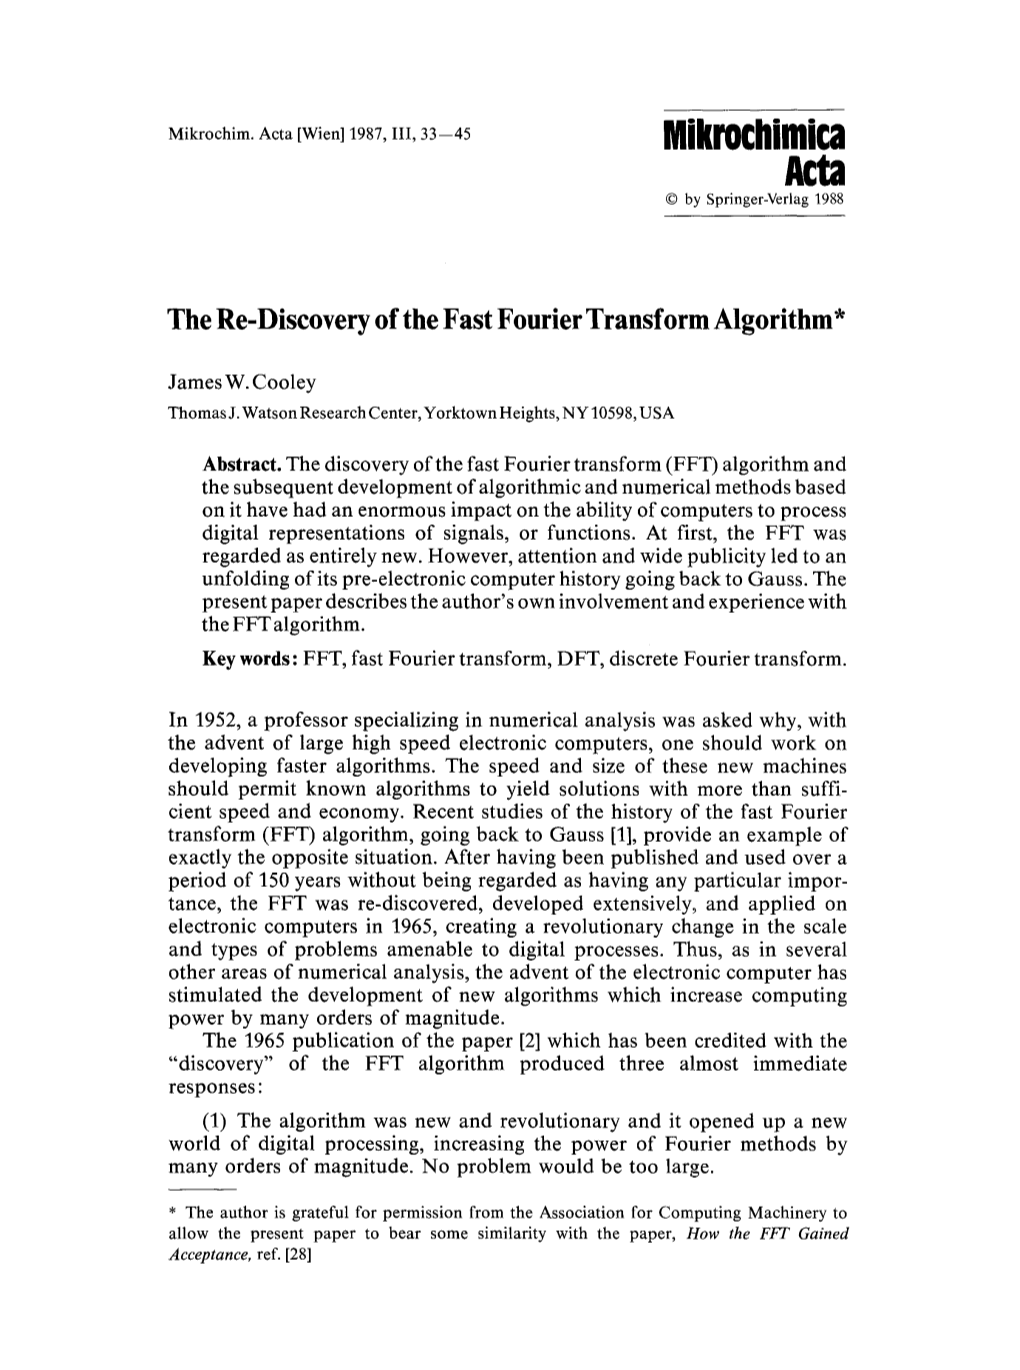 The Re-Discovery of the Fast Fourier Transform Algorithm*